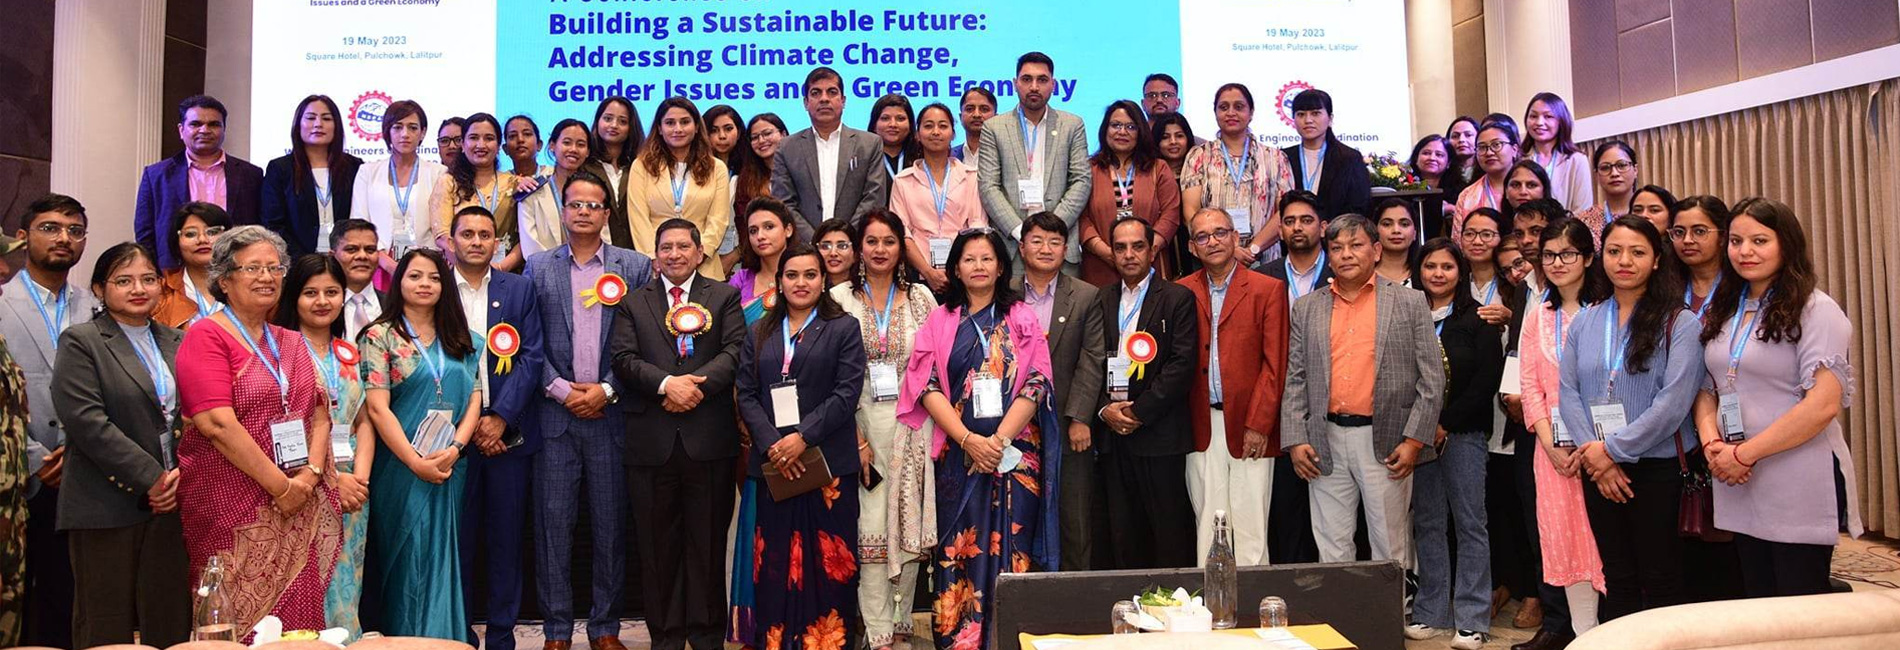 A conference on Building a Sustainable Future Addressing Climate Change, Gender Issues and a Green Economy